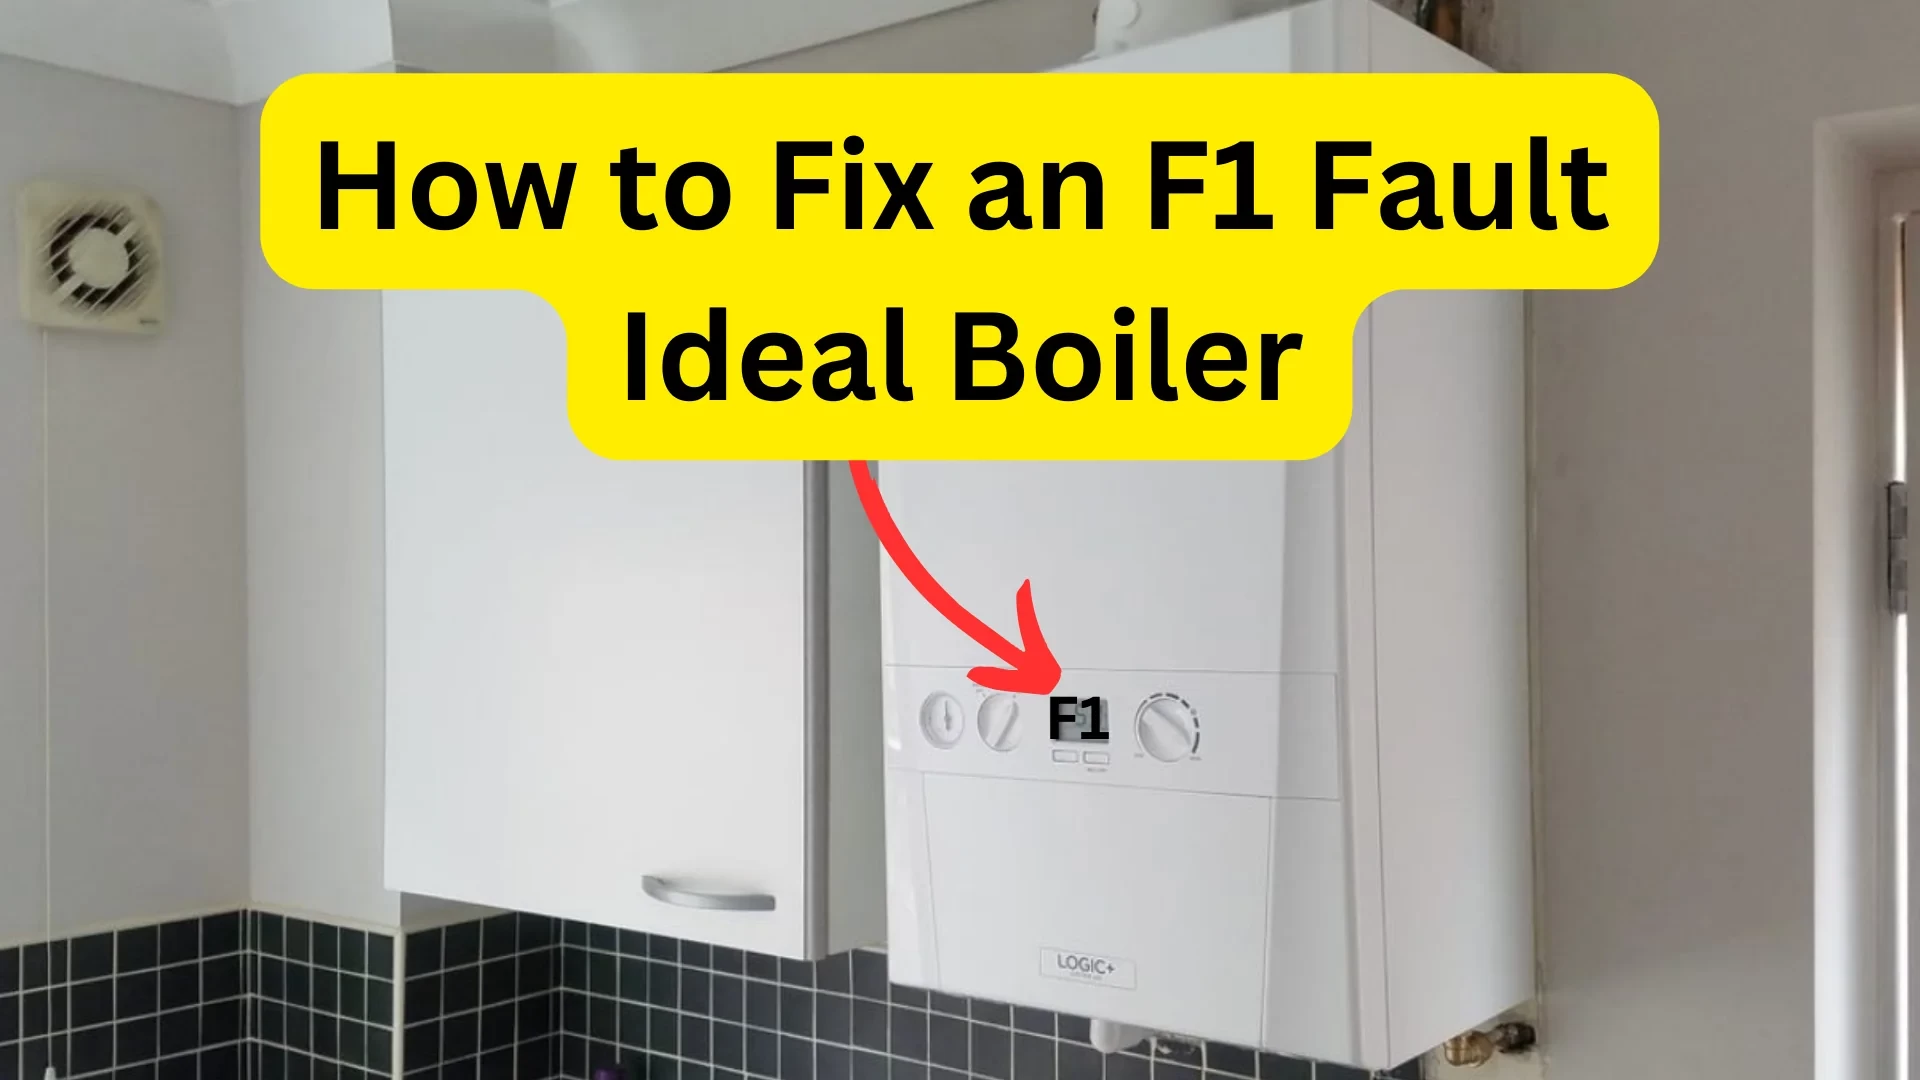 Troubleshooting the F1 Fault on Your Boiler: Causes, Solutions, and Prevention